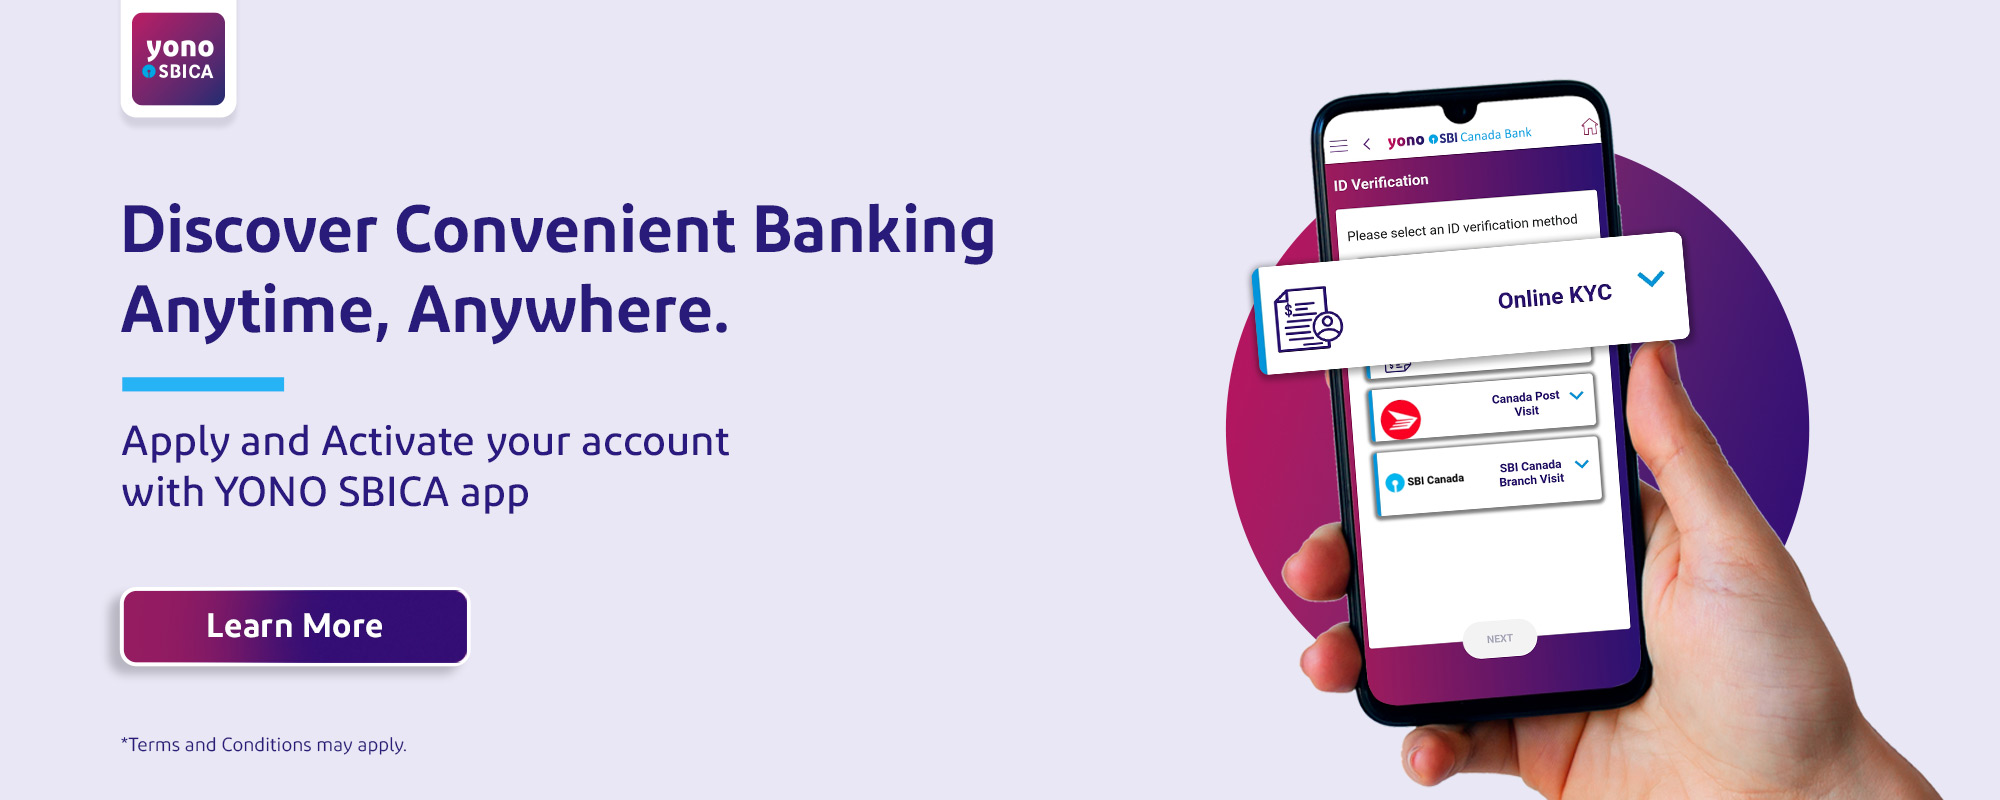 Home banner image slider one tells to discover, convienent banking anytime, anywhere. Apply and activate your account with YONO SBICA App